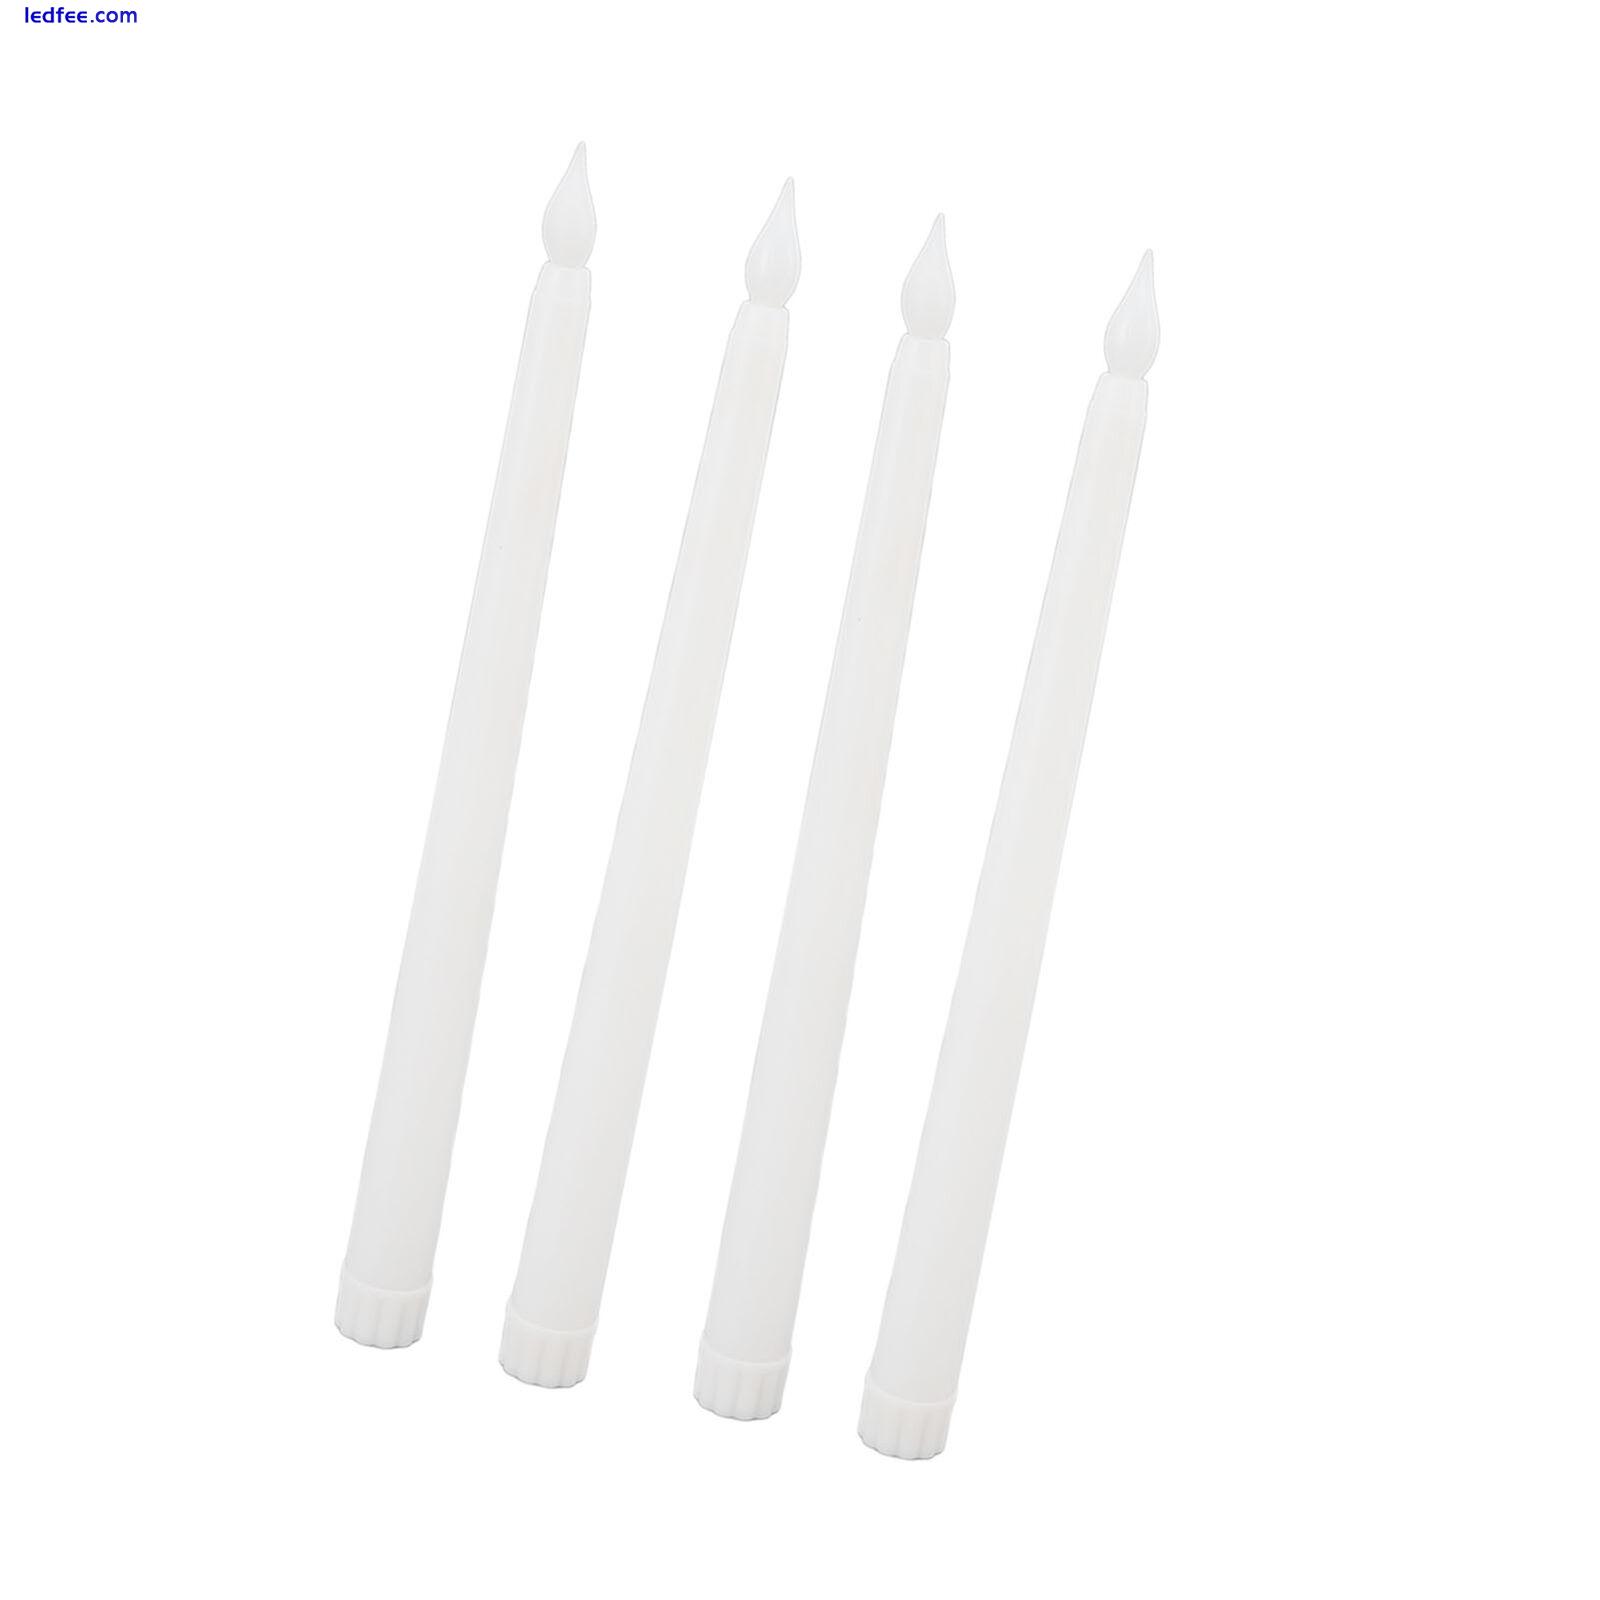 4Pcs LED Candles Smokeless Flickering Flameless Candles Battery Operated New 3 